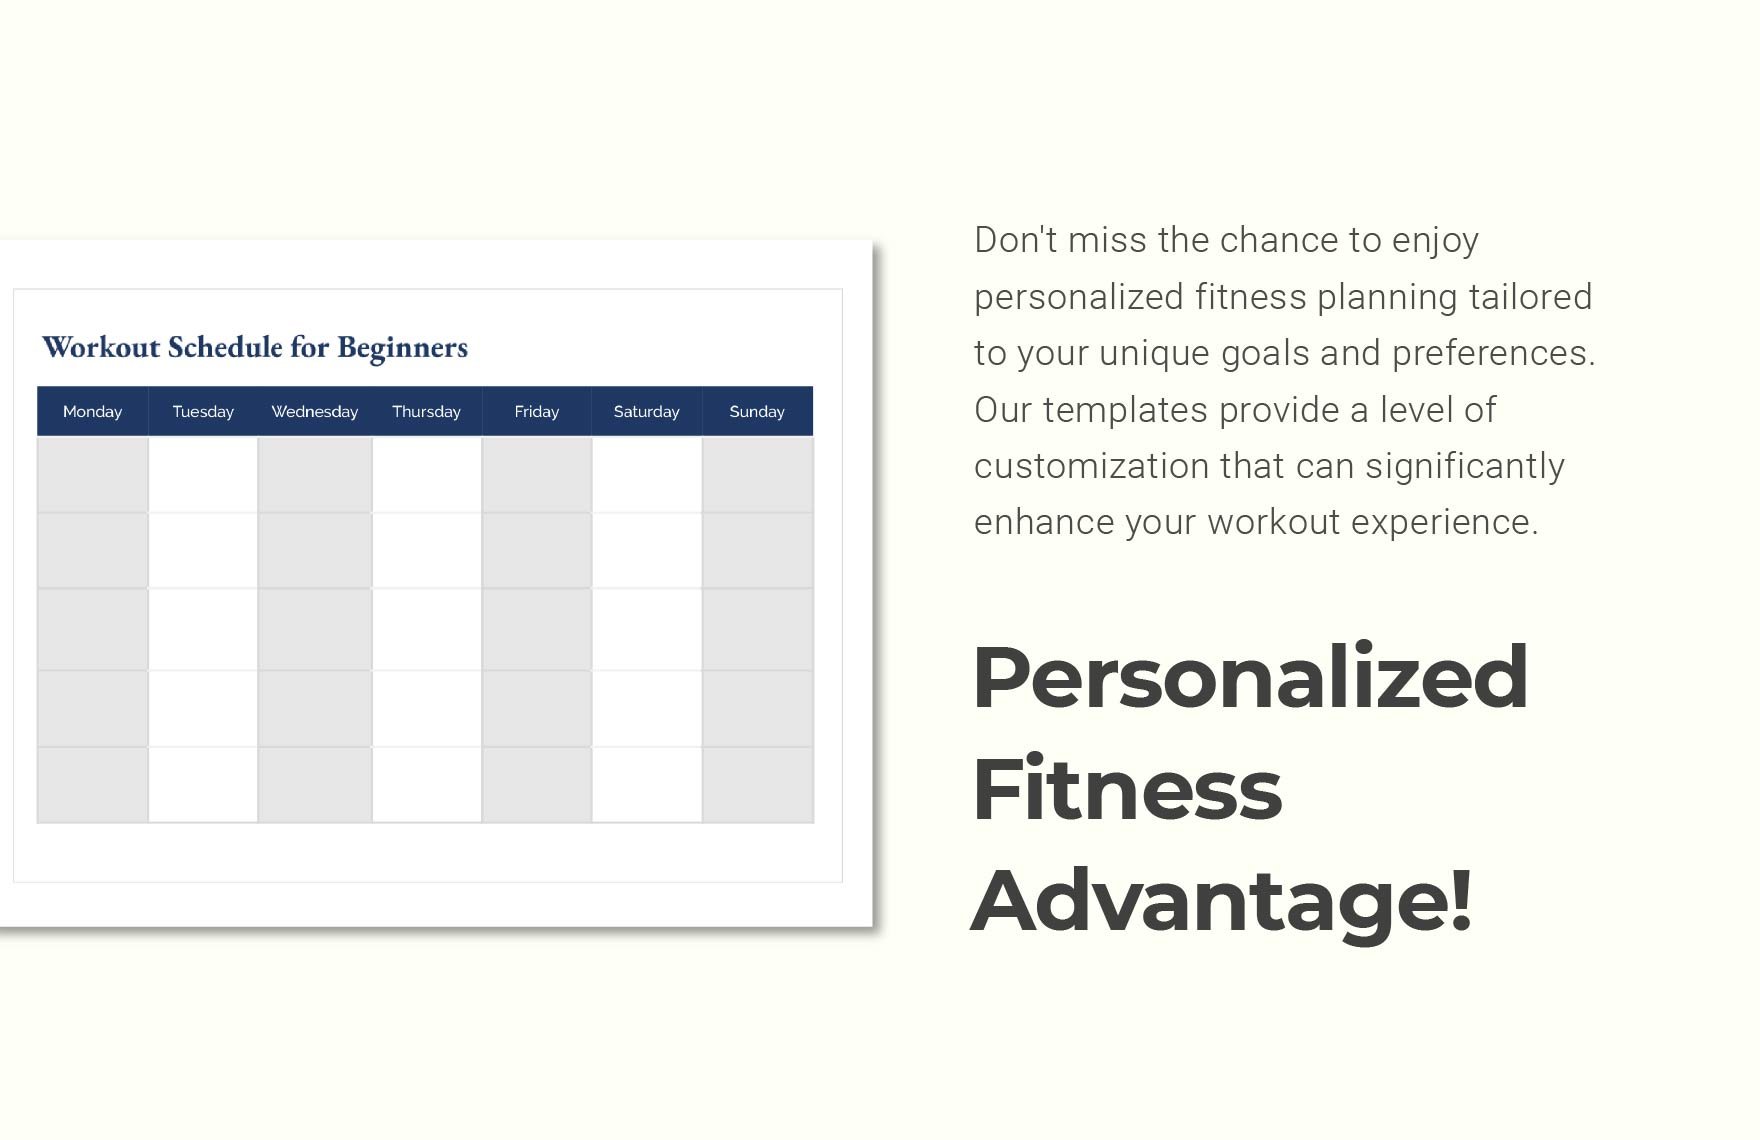 Workout Schedule for Beginners Template